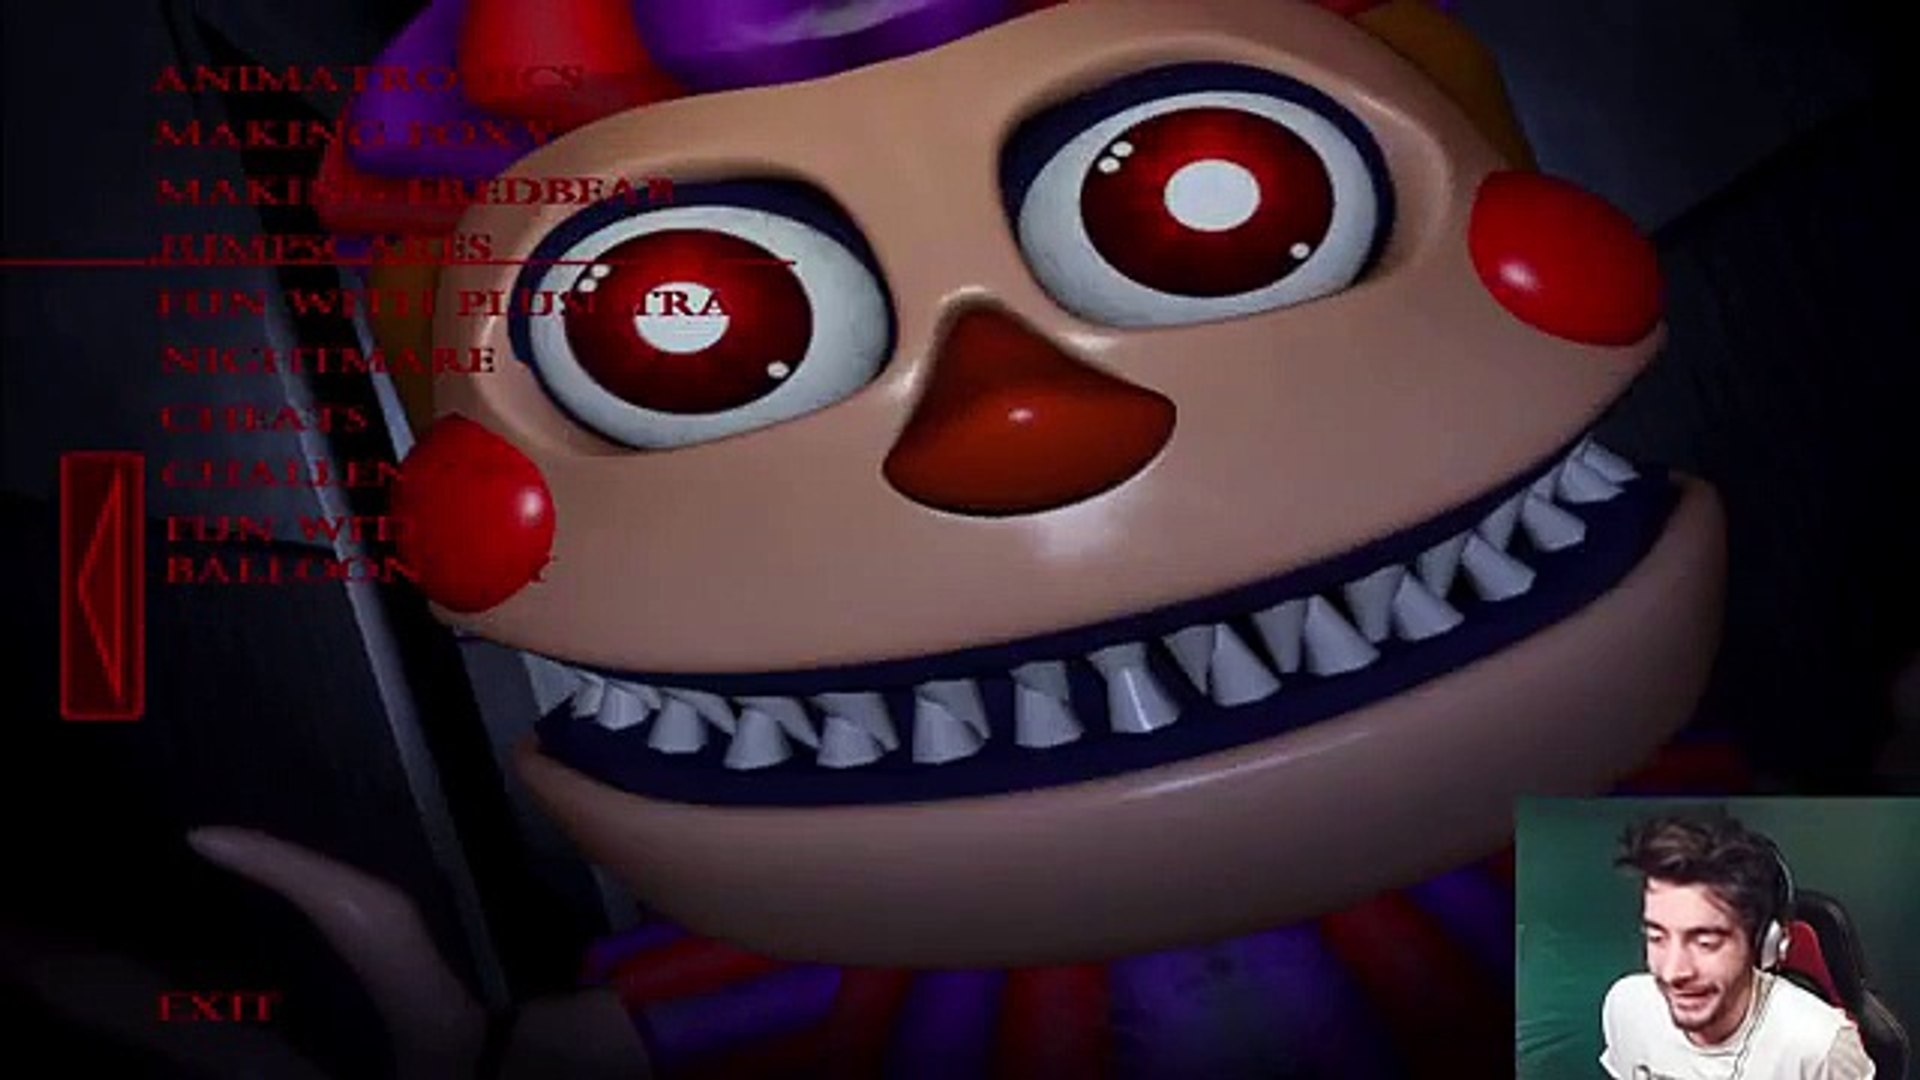 FNAF 4 HALLOWEEN EDITION JUMPSCARES & EXTRAS _ Five Nights at Freddy's 4  Halloween Edition Jumpscare - video Dailymotion